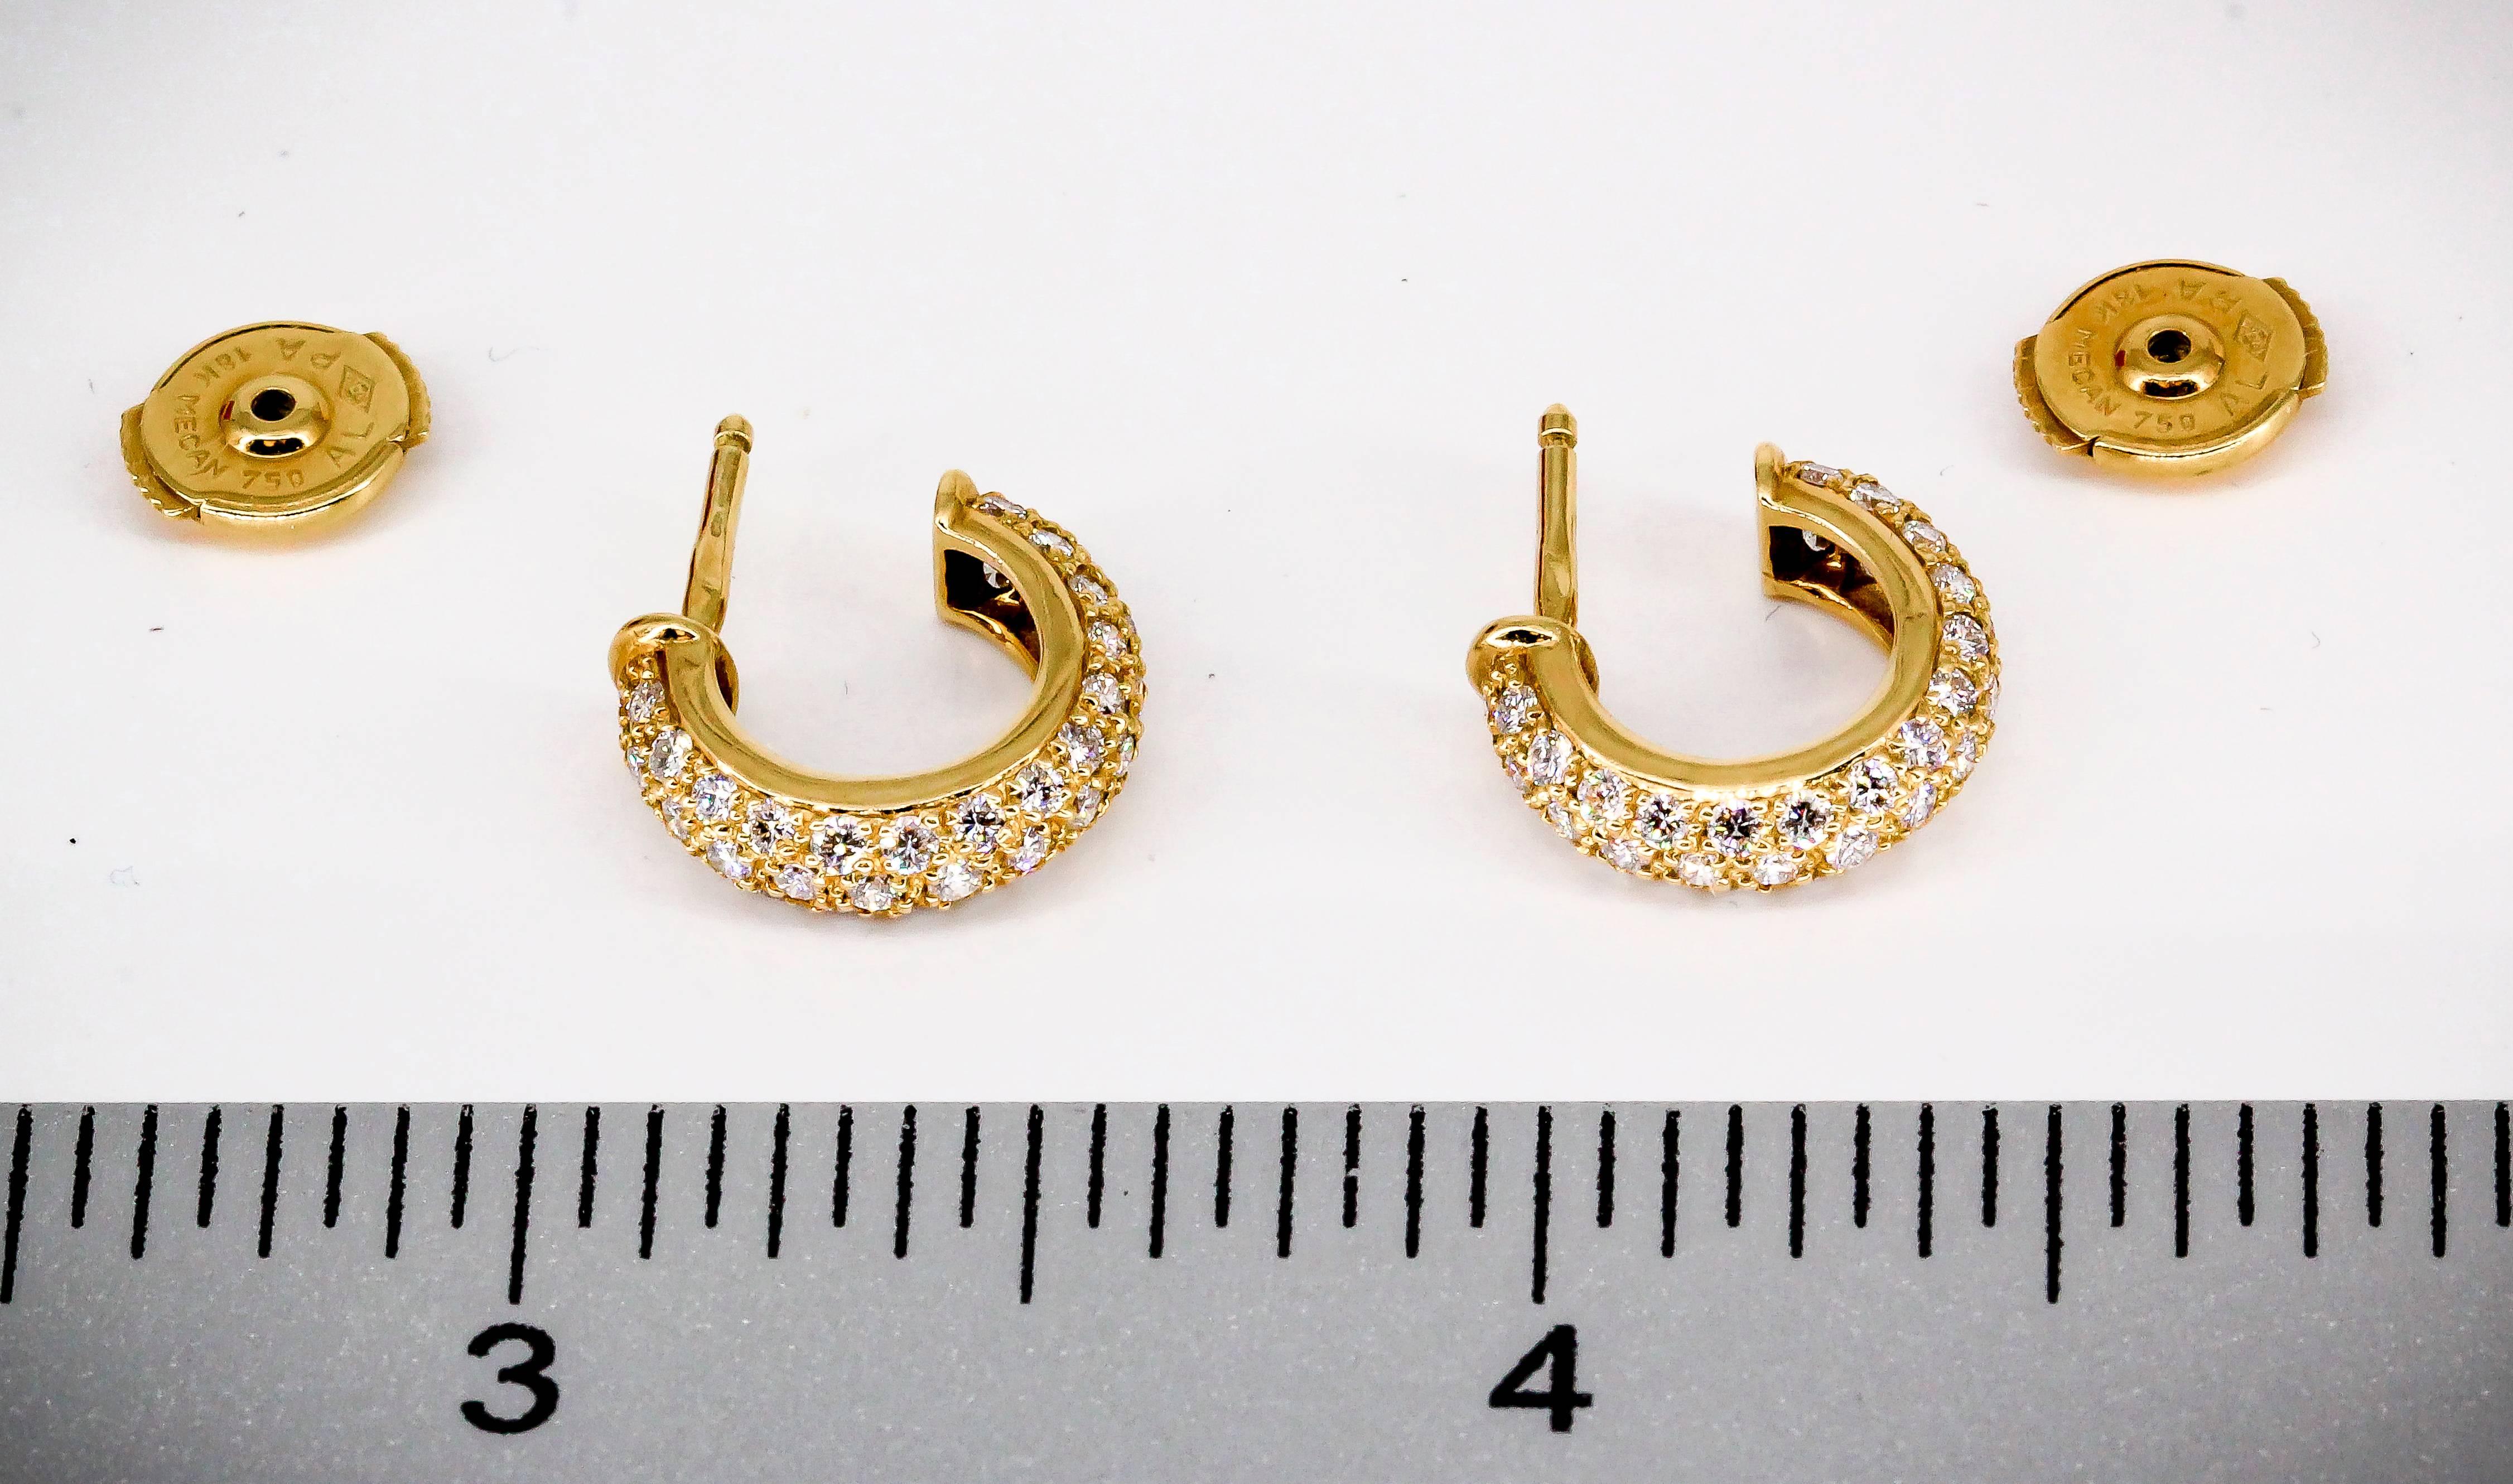 Classic diamond and 18K yellow gold earrings from the "Mimi" collection by Cartier. They feature very high grade round brilliant cut diamonds, approx. 1.0cts total weight.
Hallmarks: Cartier, reference numbers, maker's mark, French 18K